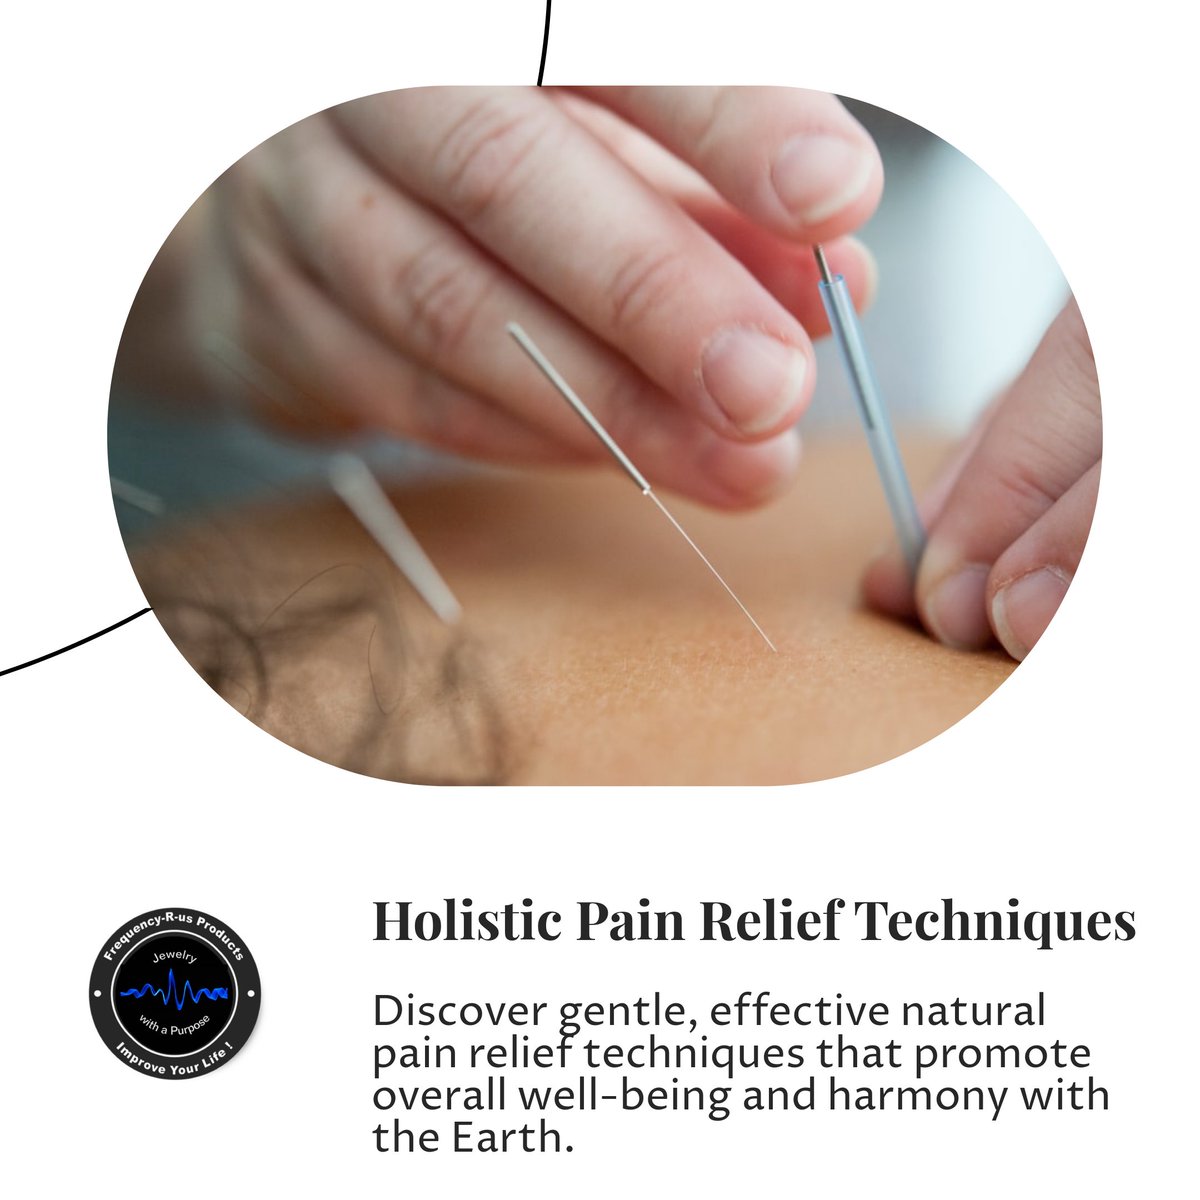 Discover a new way to manage pain and enhance your well-being. Contact us at 847-704-0355 to explore our range of products designed to work with the body's natural frequencies. #HolisticPainRelief #NaturalWellness #HarmonyWithEarth